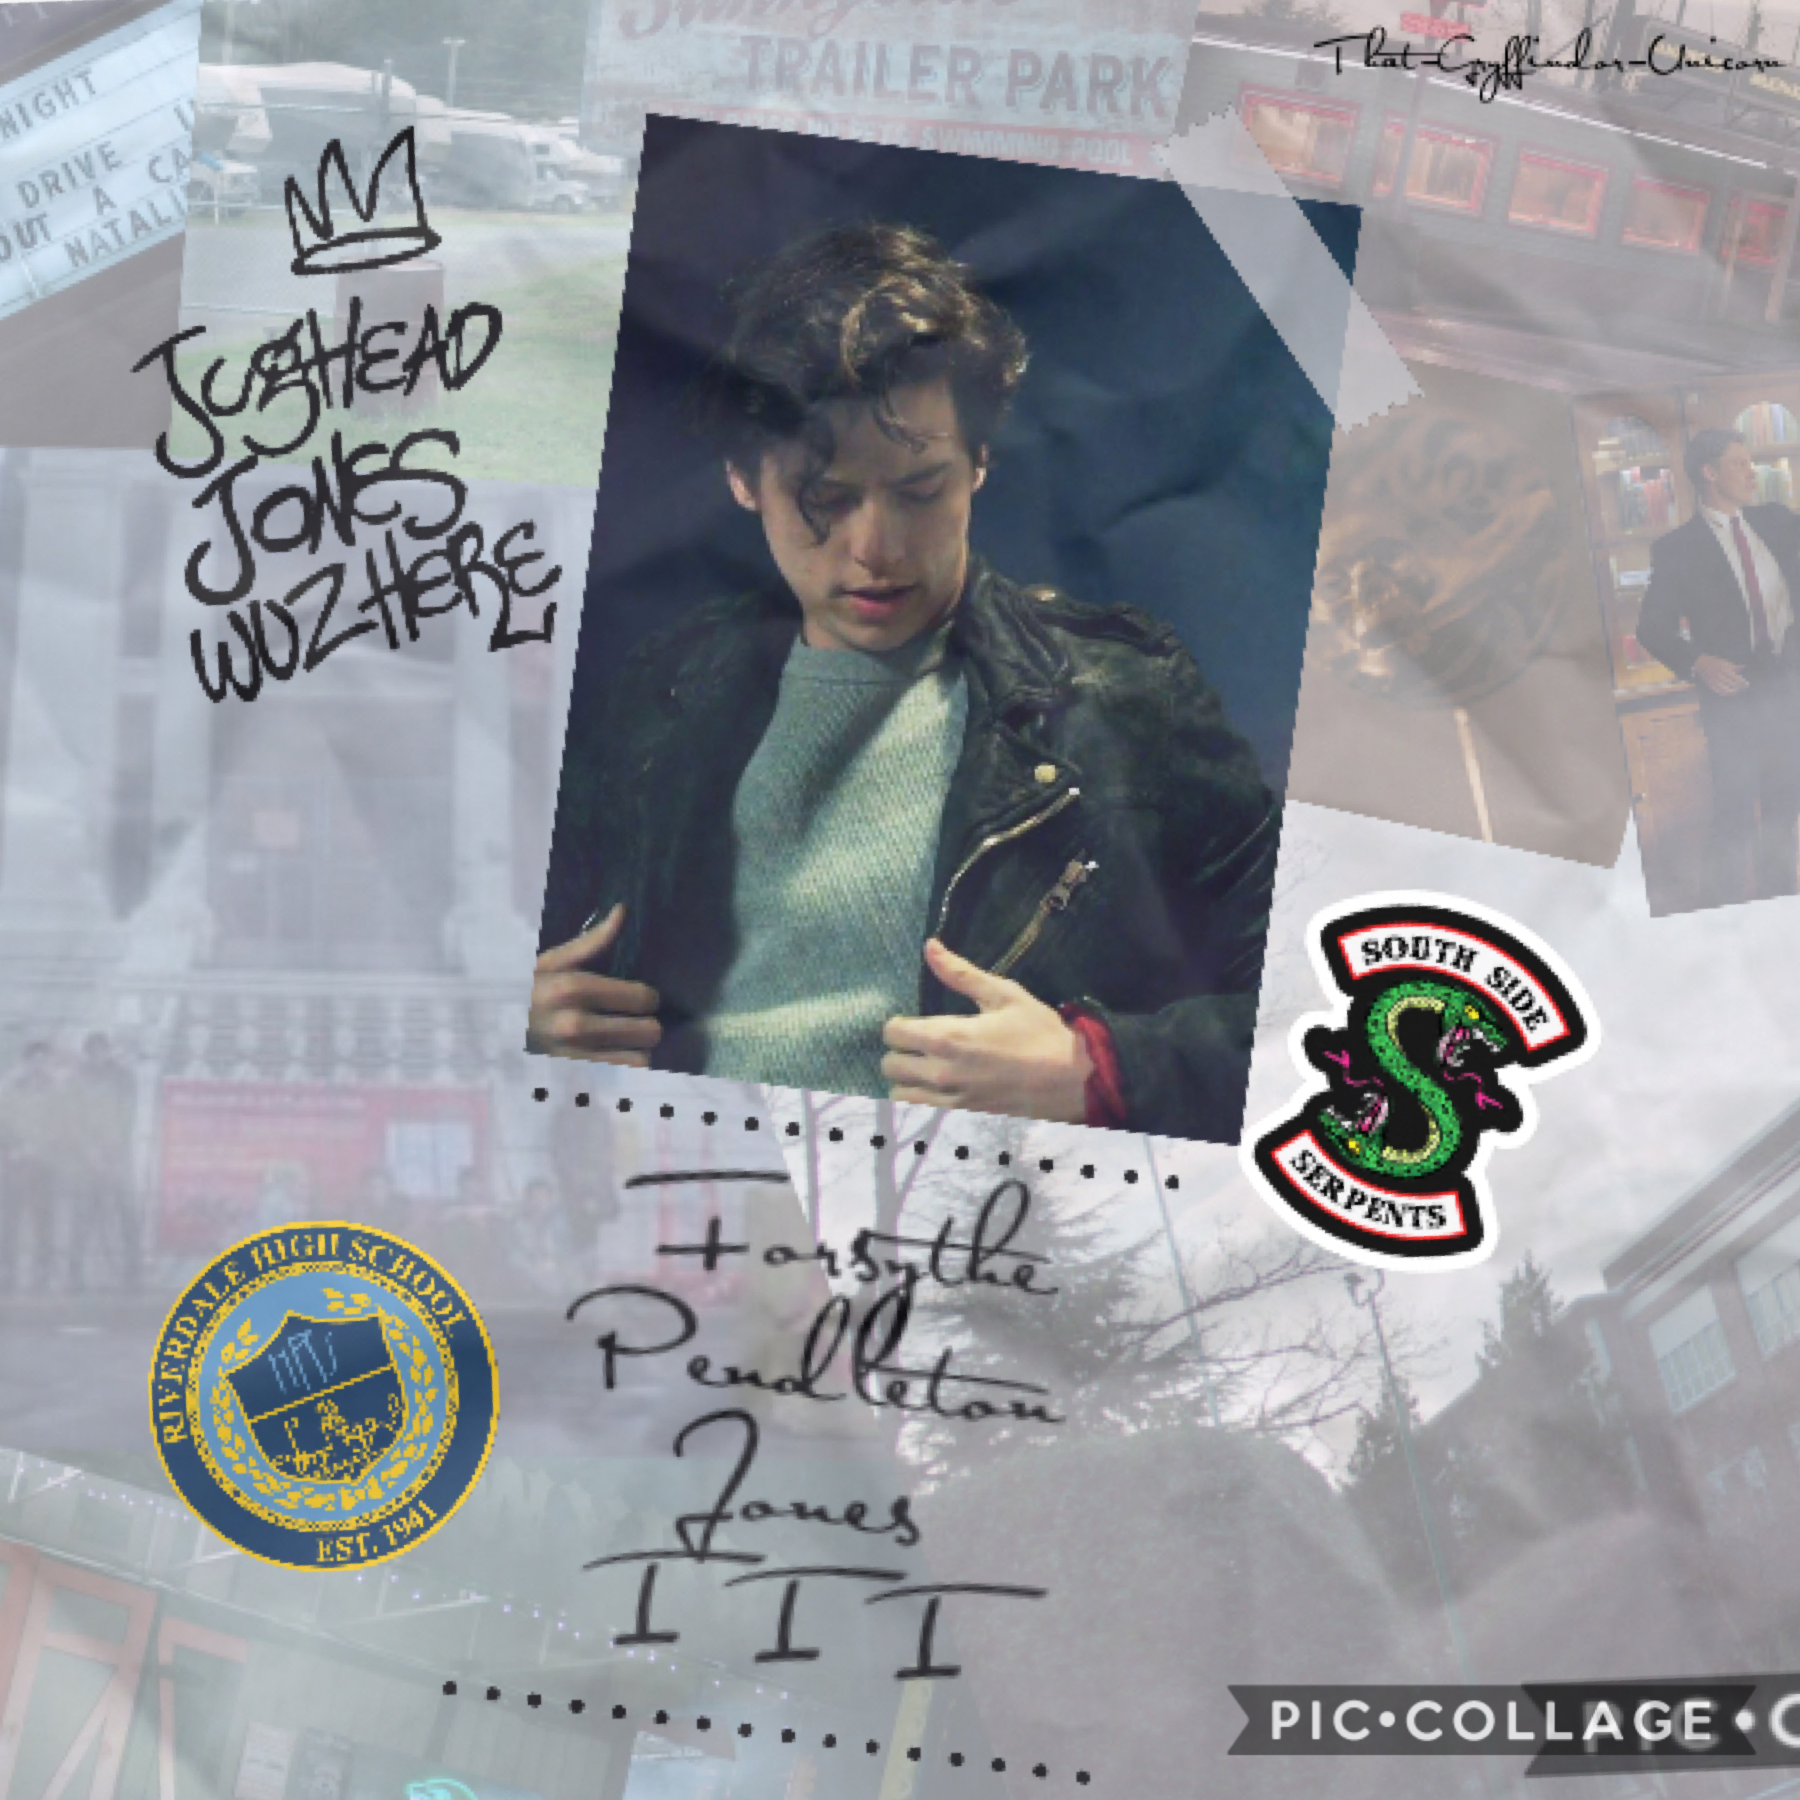 🐍Tap🐍 

Inspired by Jughead Jones from Riverdale. 

Sorry I haven’t posted for a while, I       needed a break to come up with some more ideas for my collages.